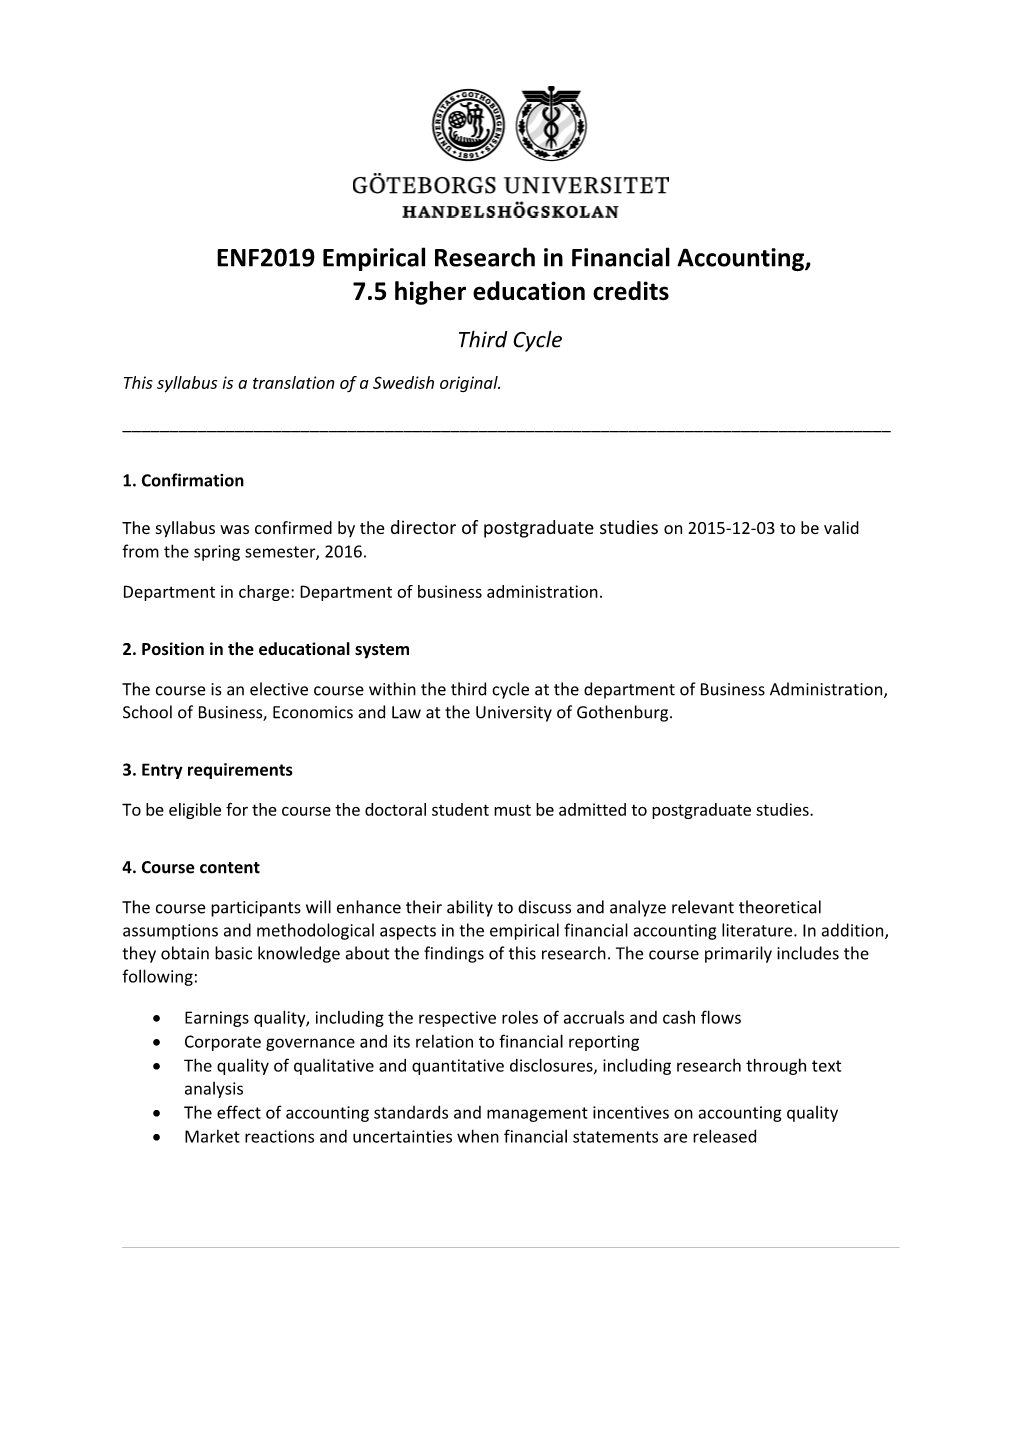 ENF2019 Empirical Research in Financial Accounting